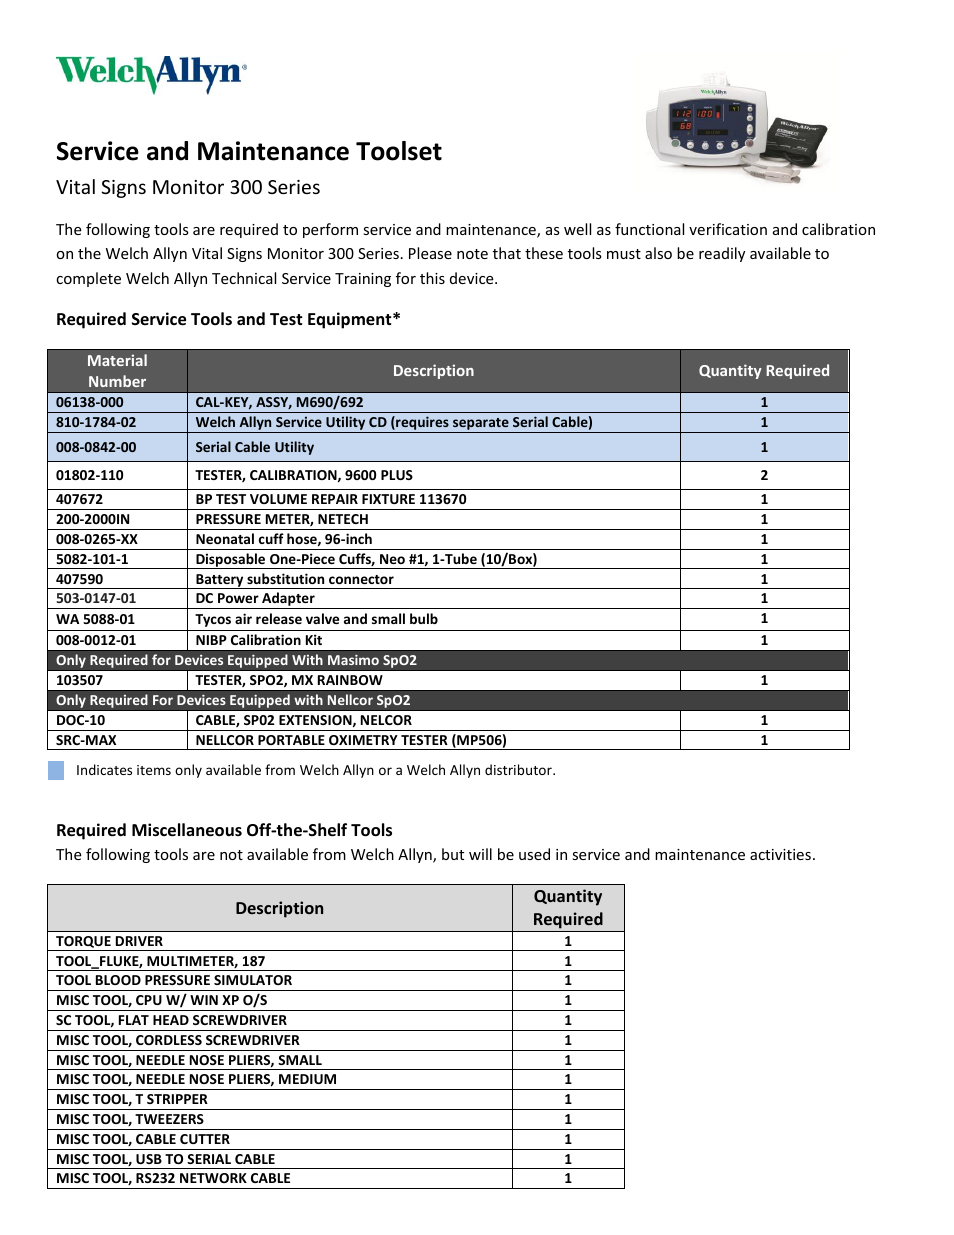 Vital Signs Monitor 300 Series, Required Service Tools and Test Equipment - Quick Reference Guide